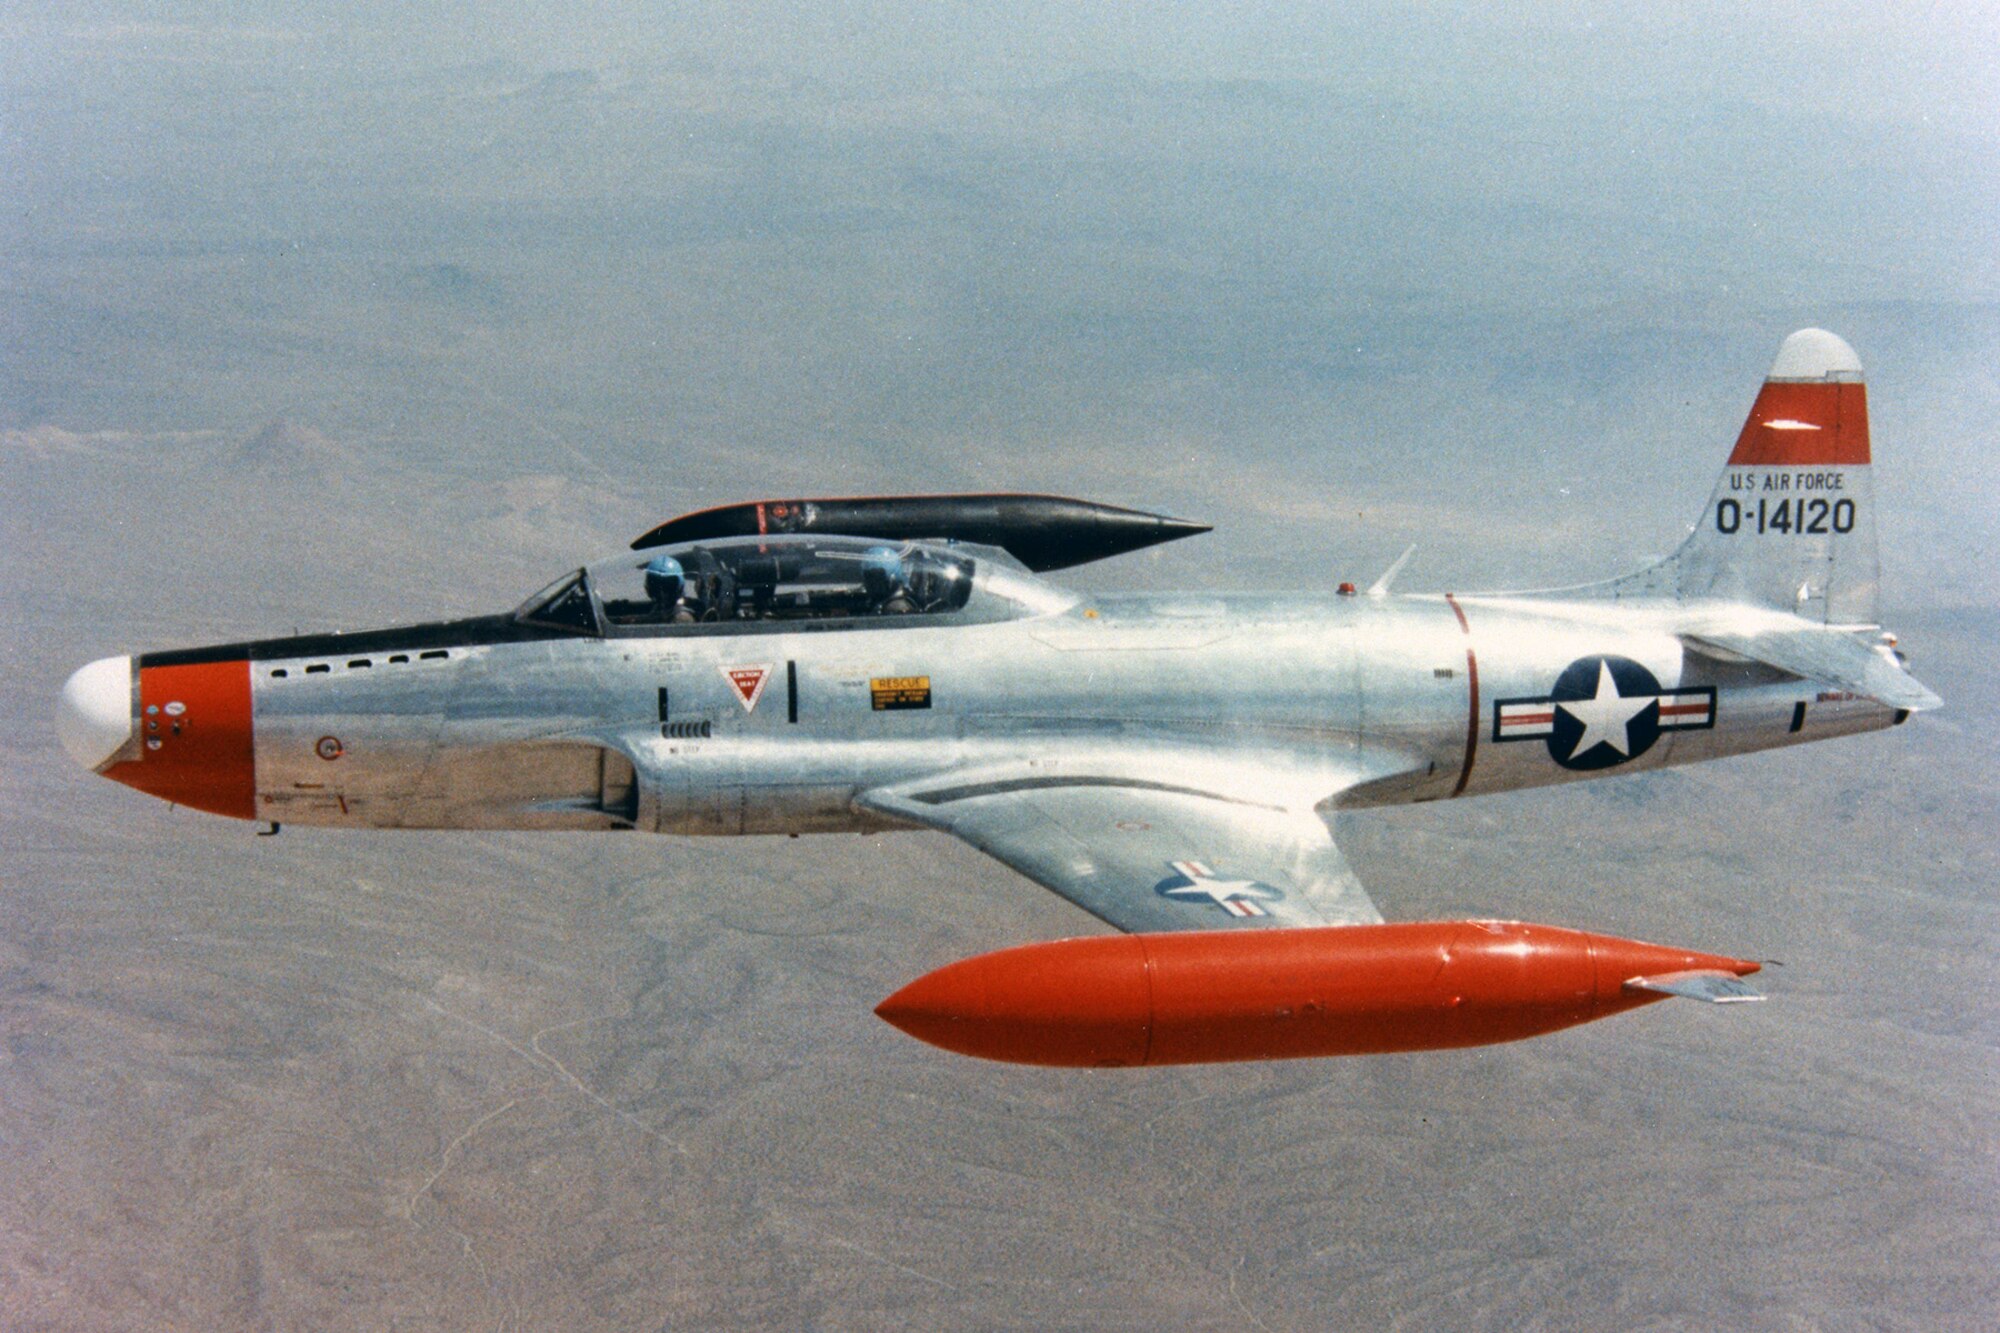 When the evaluation pilot in the front seat moved the controls, the NT-33A responded as would the simulated aircraft. The rear seat was occupied by a safety pilot whose standard controls enabled him to fly the aircraft in case the computer malfunctioned or if the simulation proved too difficult to control. (U.S. Air Force photo)